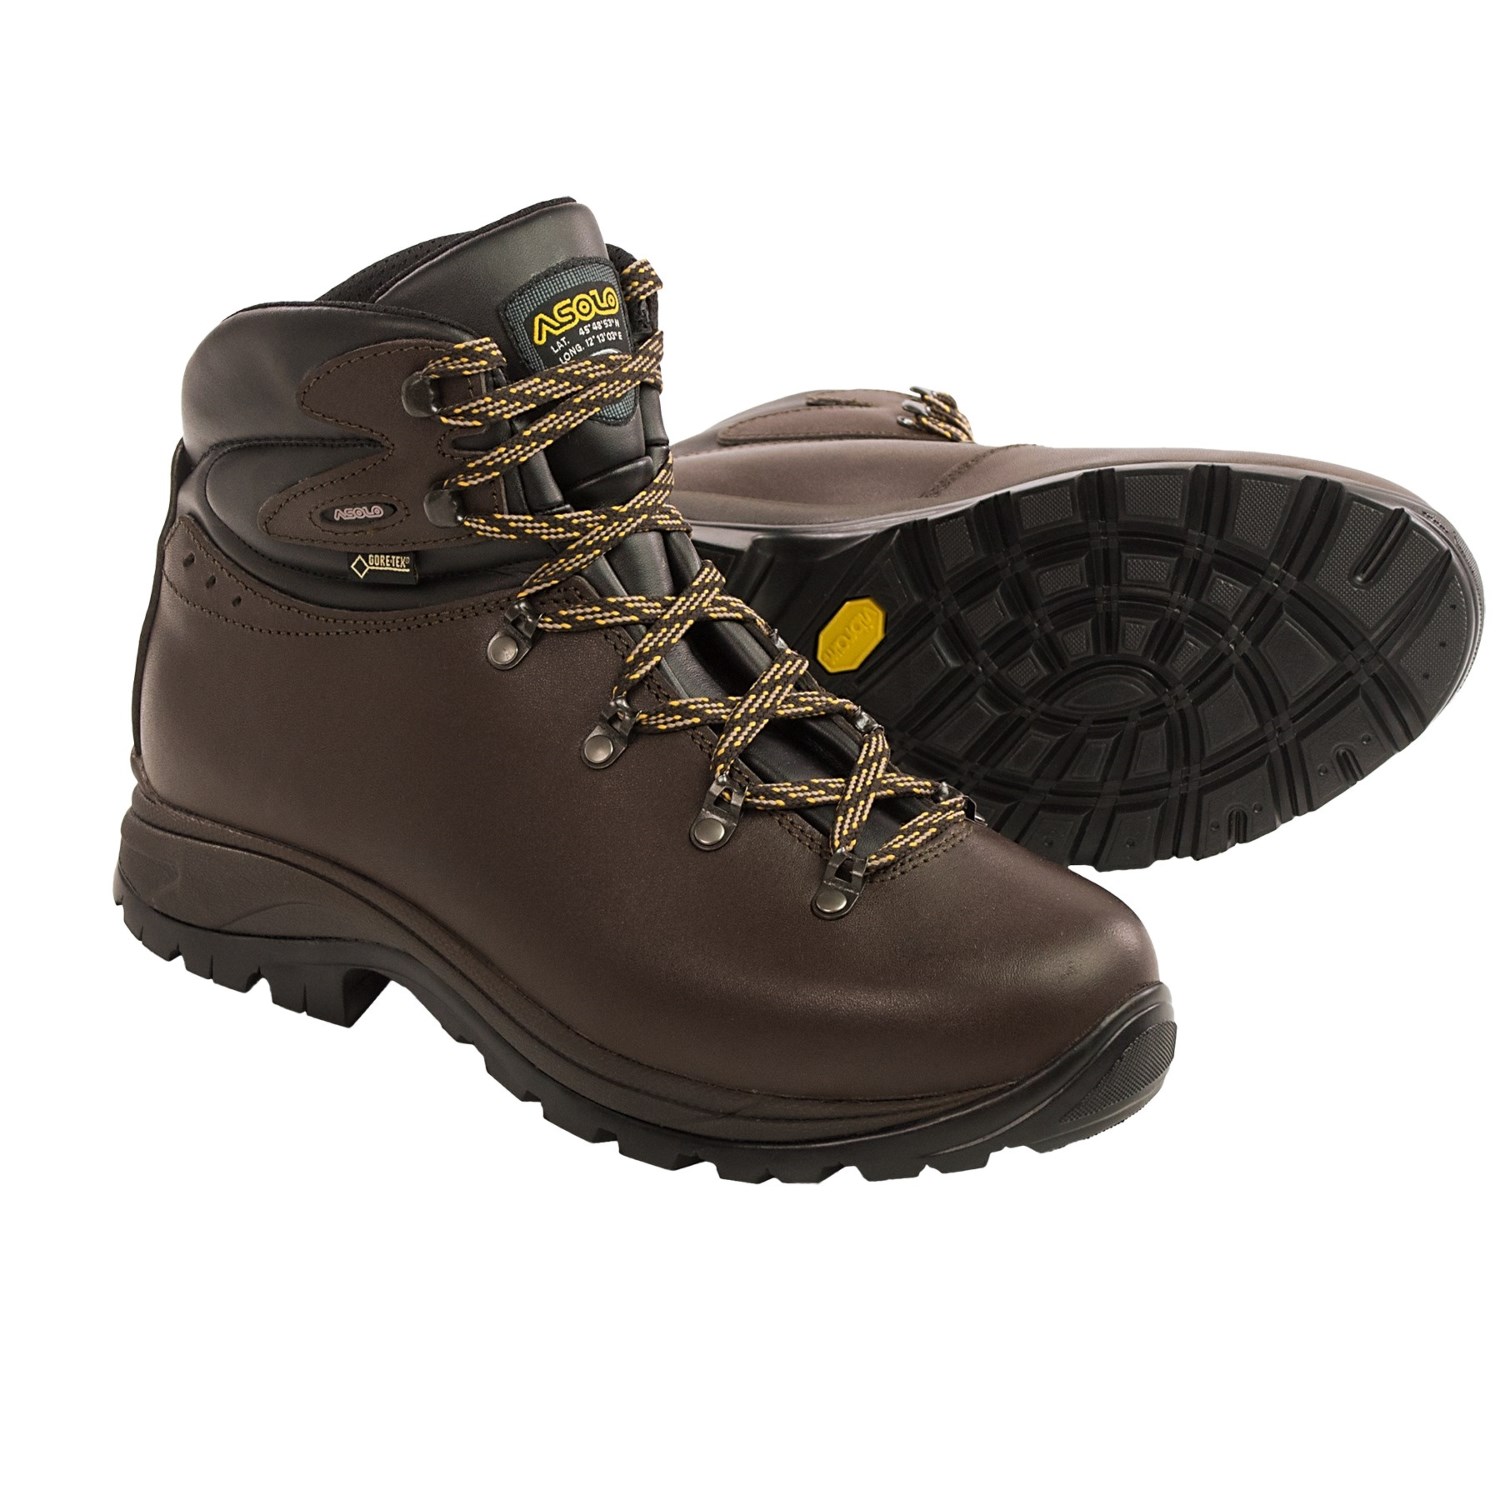 gore tex boots asolo scafell gore-tex® hiking boots - waterproof, leather (for men) KVFRLRK